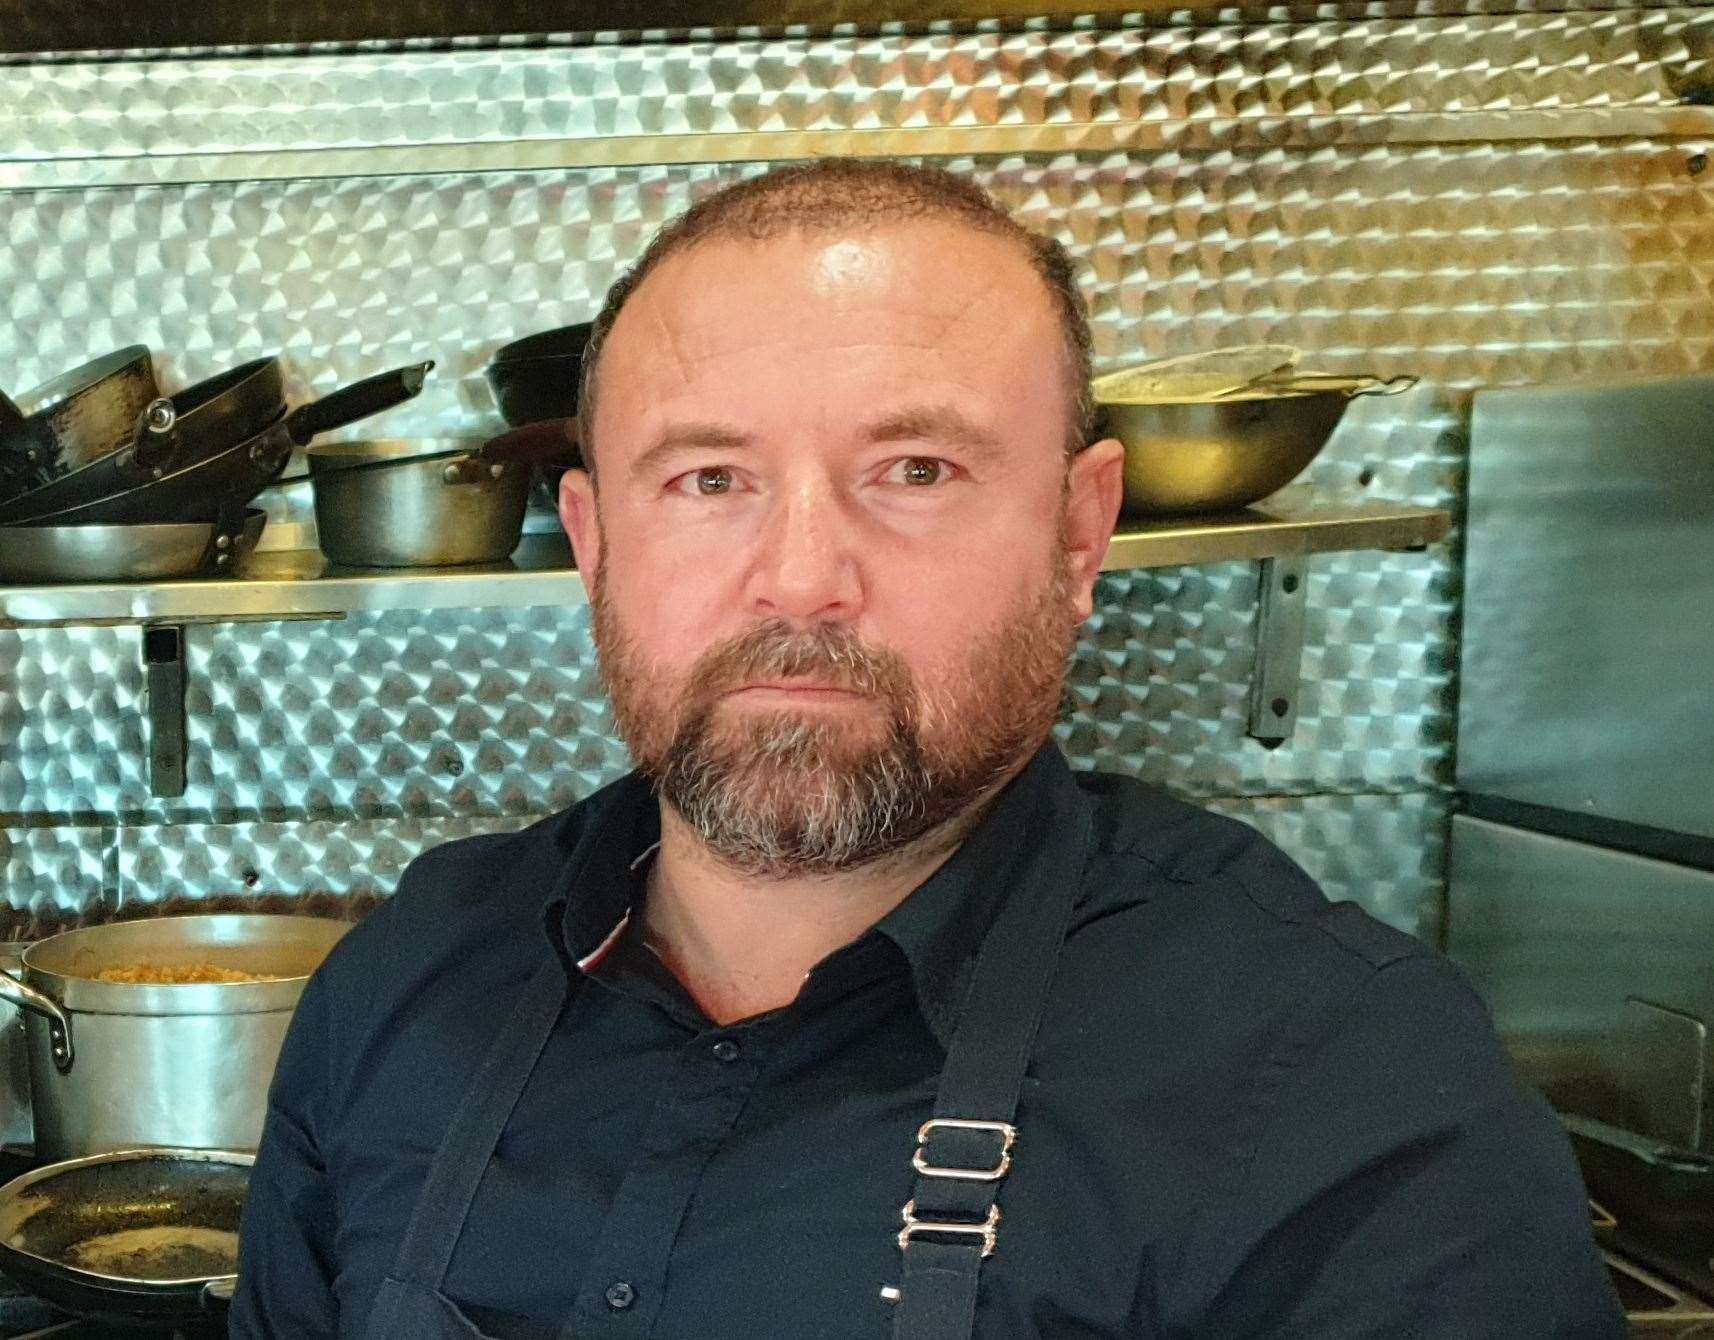 A La Turka owner Mehmet Dari has vowed to fight the licence review